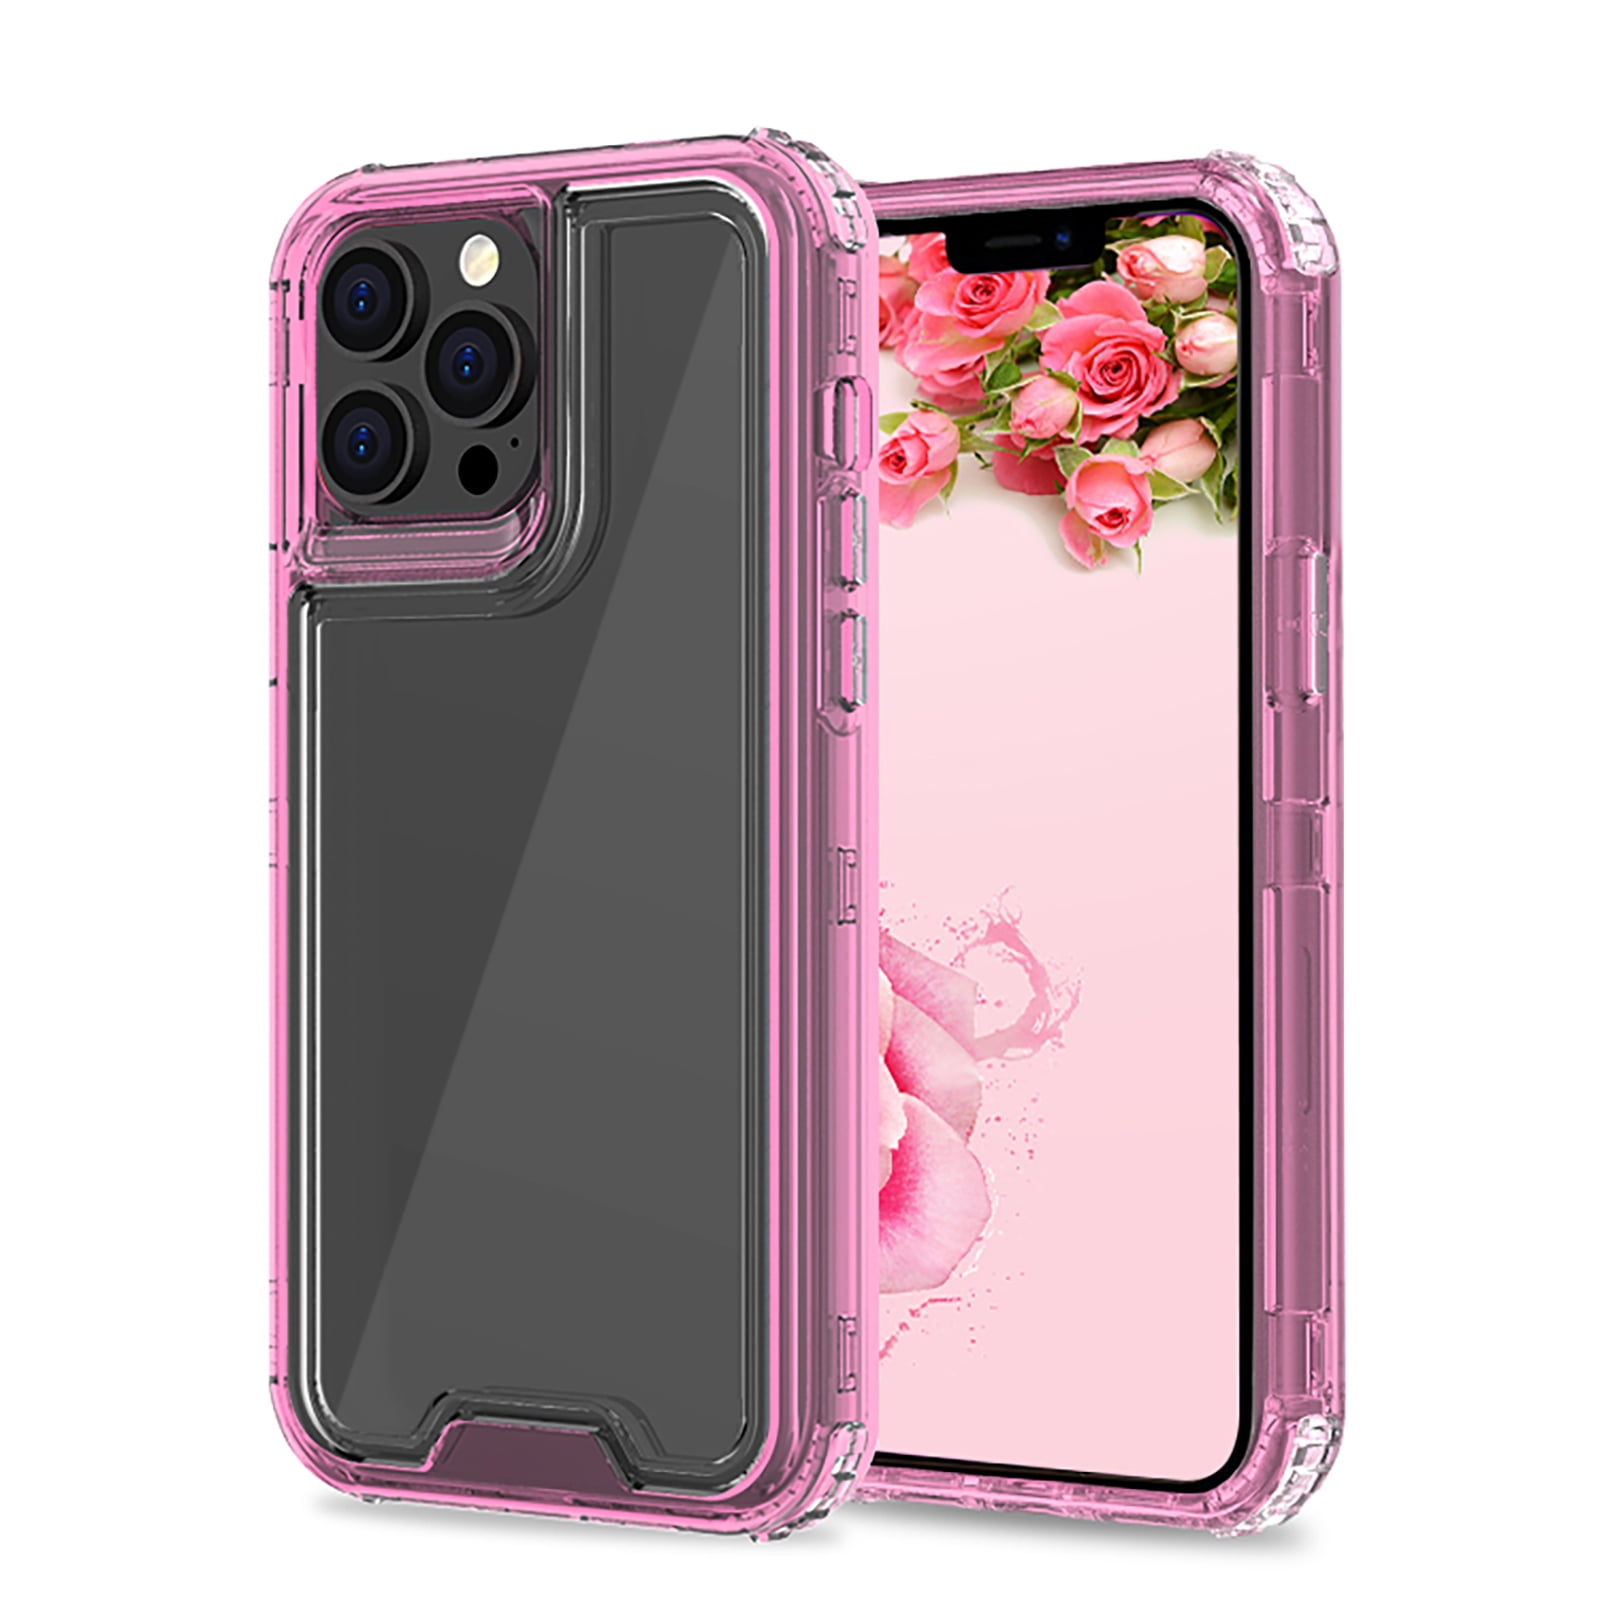 Aukvite Case for iPhone 13 Pro max TPU Clear Case Slim Thin Cover for iPhone 5G 6.7 inch 2021 Transparent Case Shockproof Anti-fall Black Cover for iphone 13 Pro max with Camera Protection